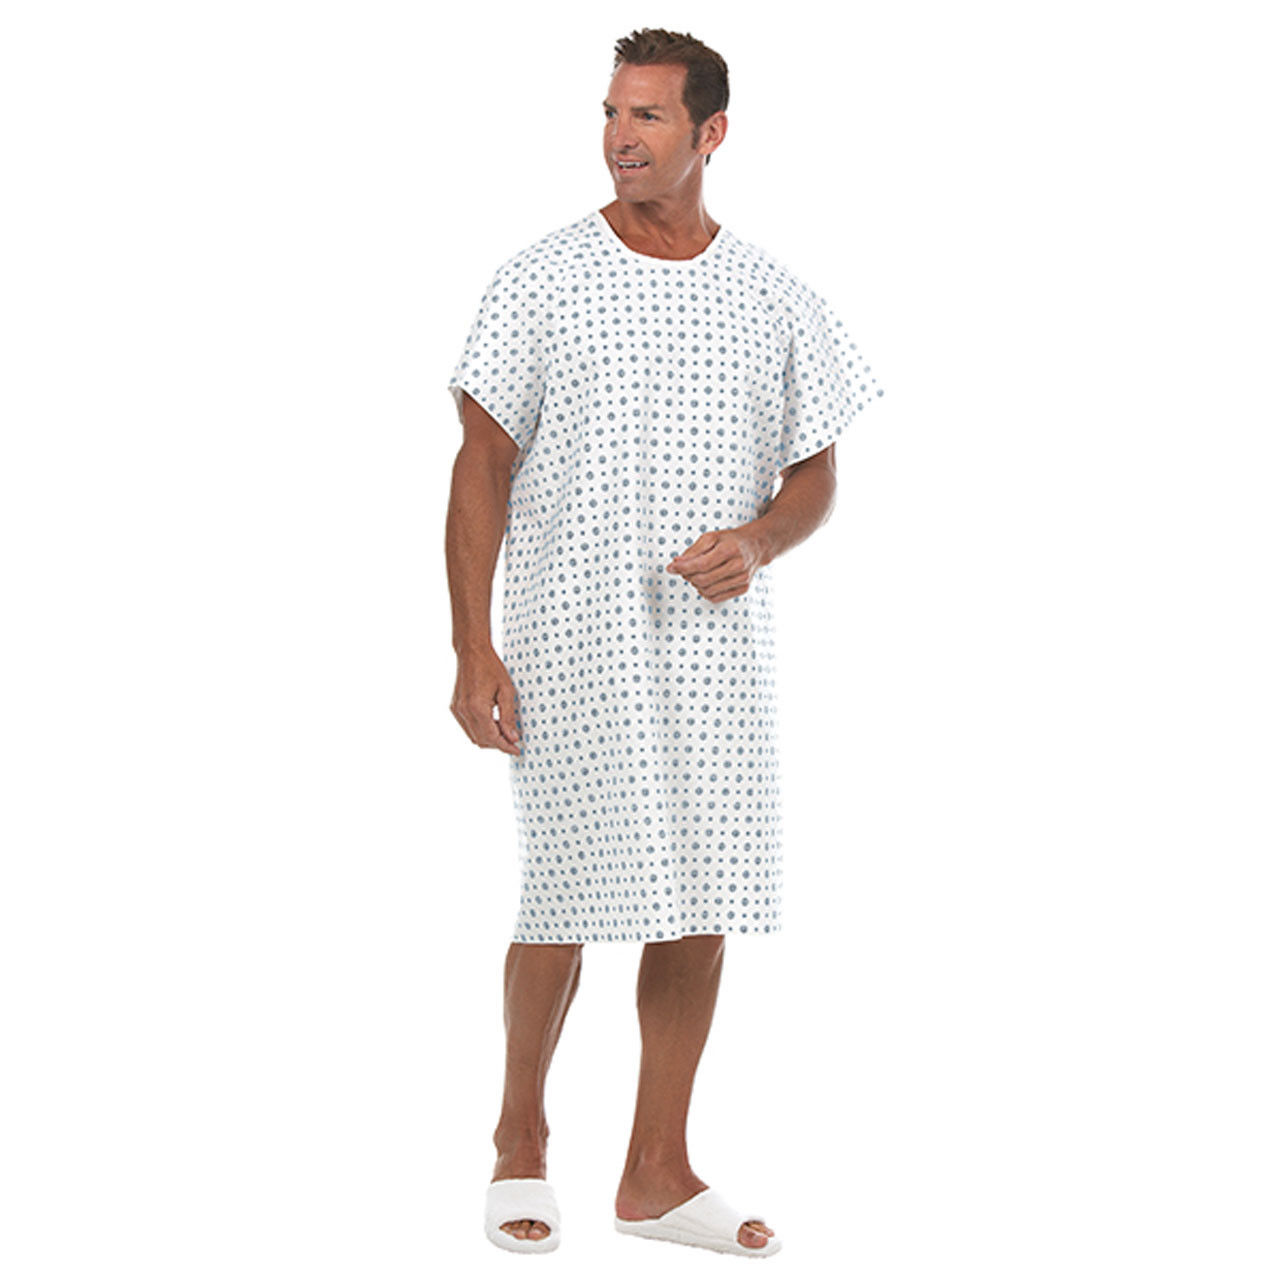 How long are the bulk hospital gowns I'm planning to purchase?